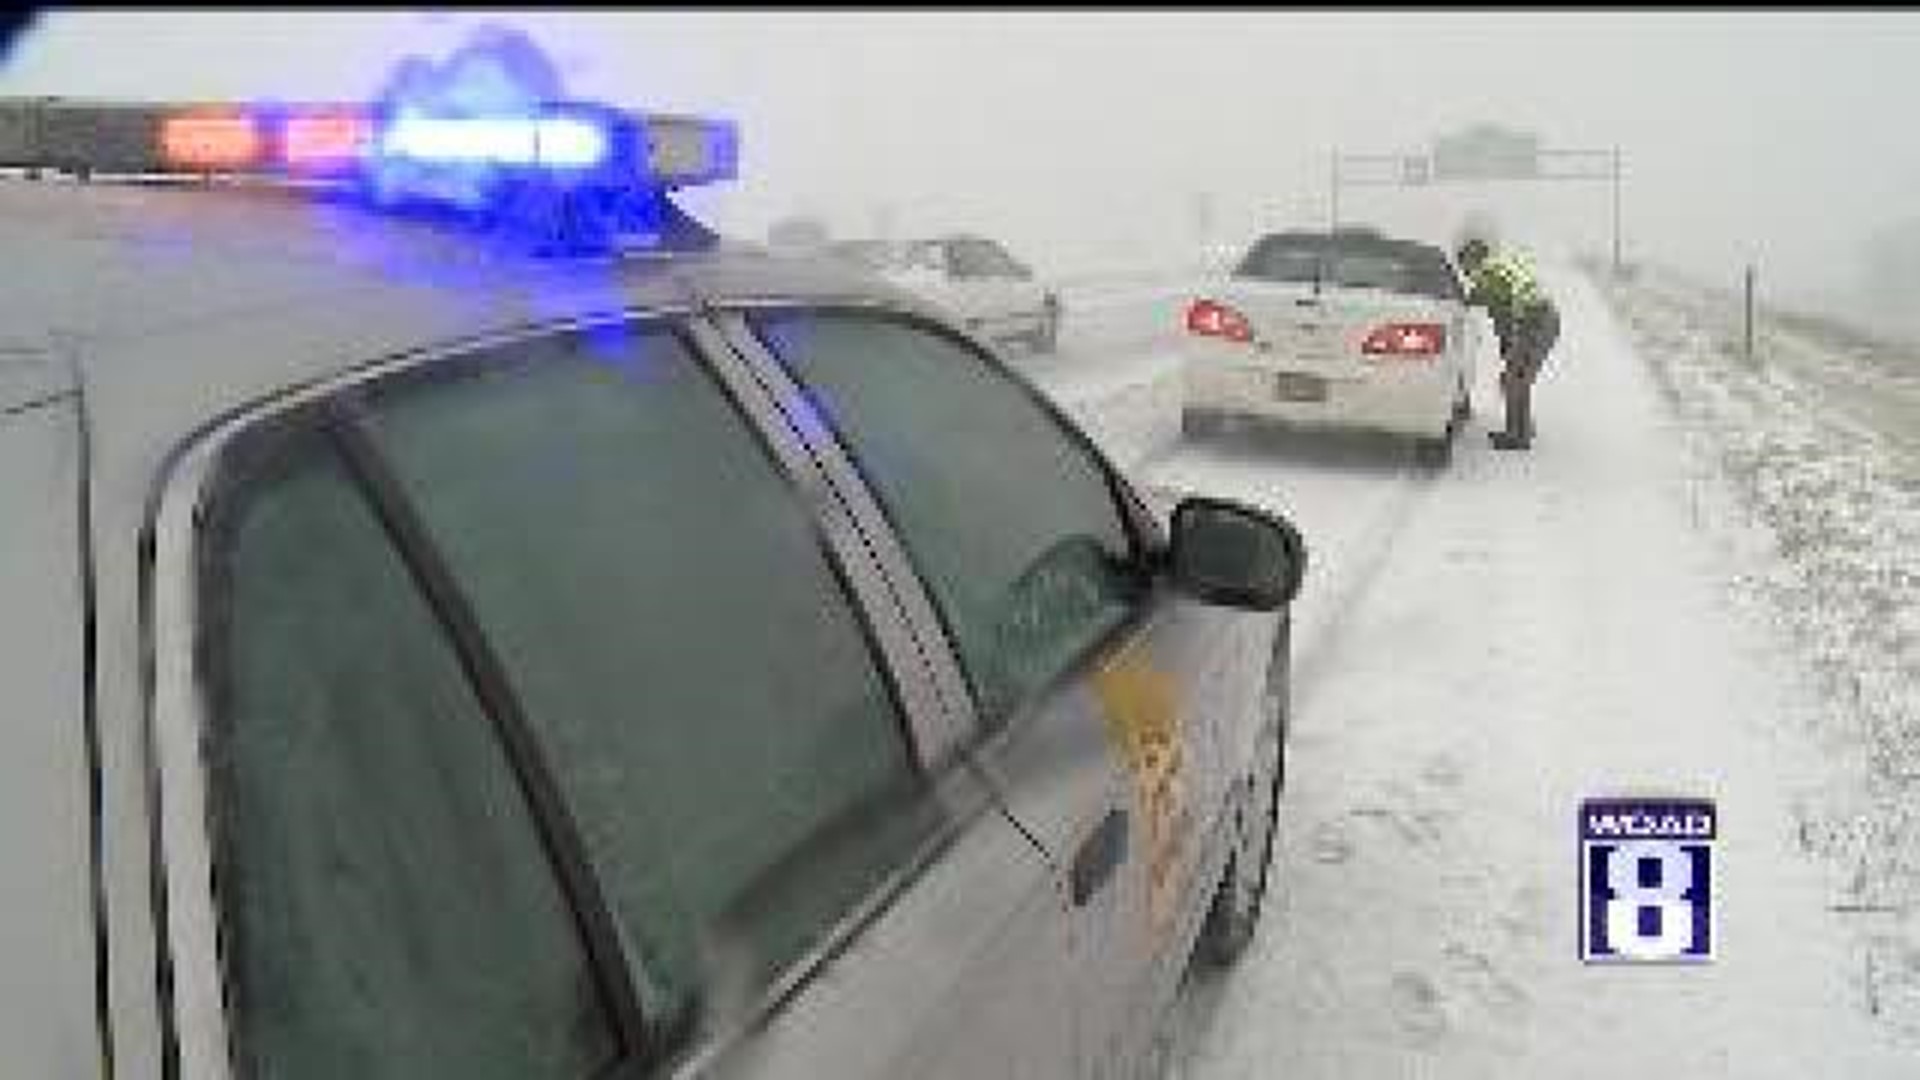 Iowa State Patrol rescues motorists during blizzard